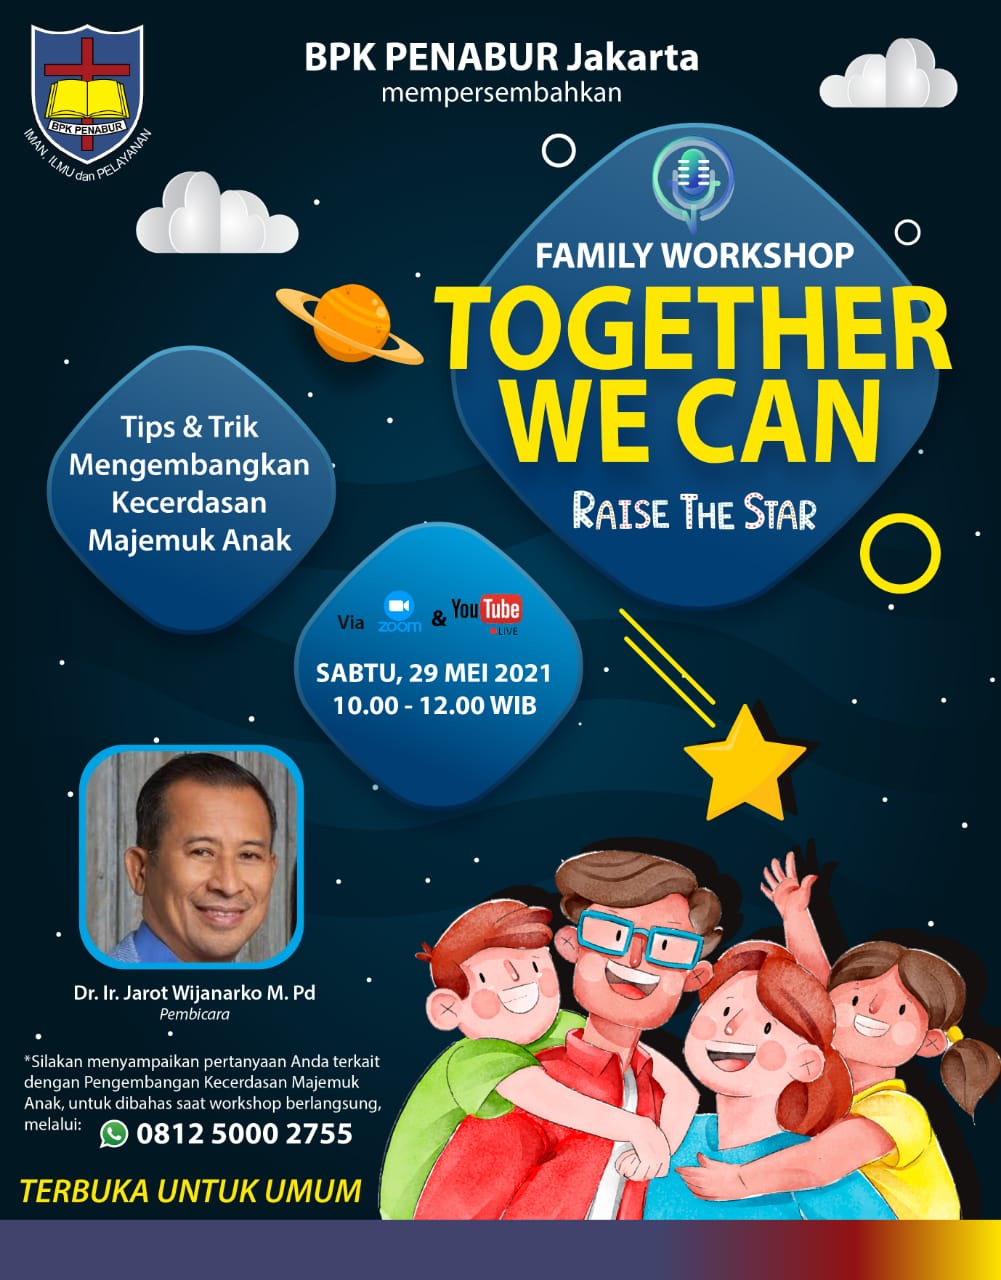 FAMILY WORKSHOP "TOGETHER WE CAN RAISE THE STAR"